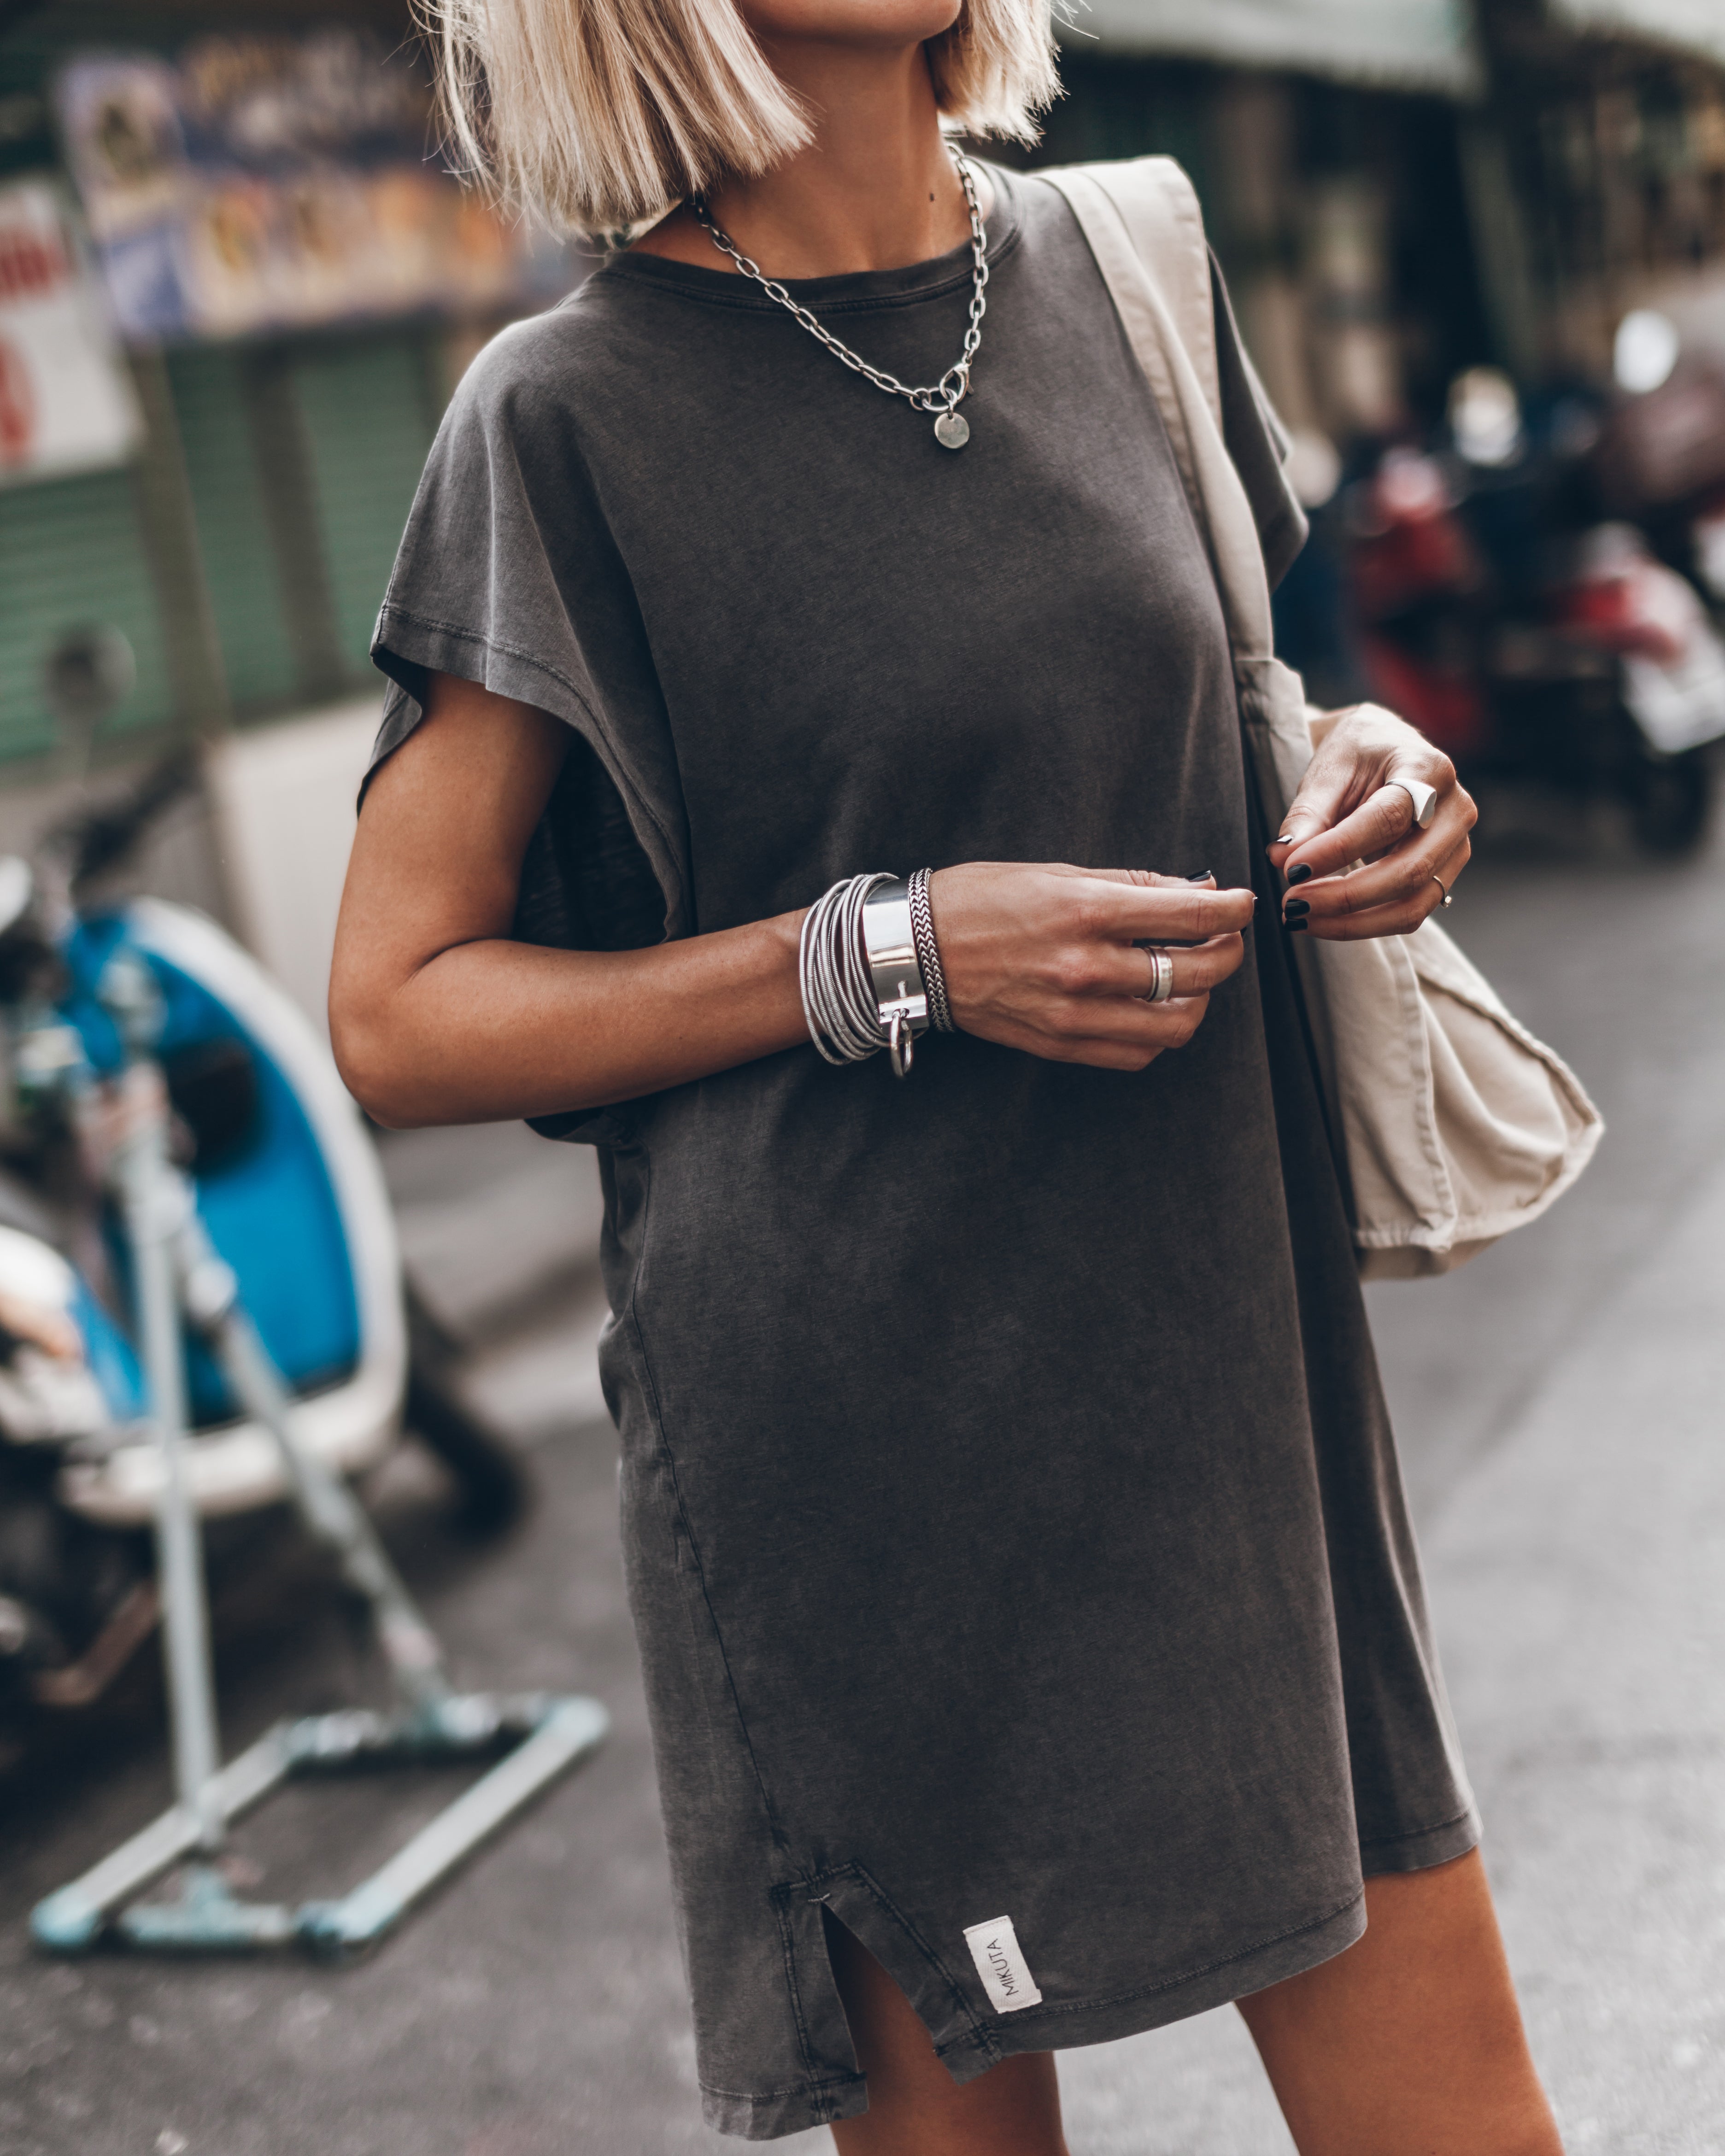 T-Shirt Dresses Are A Summer Essential - Here's How to Style Them - Fashion  Jackson